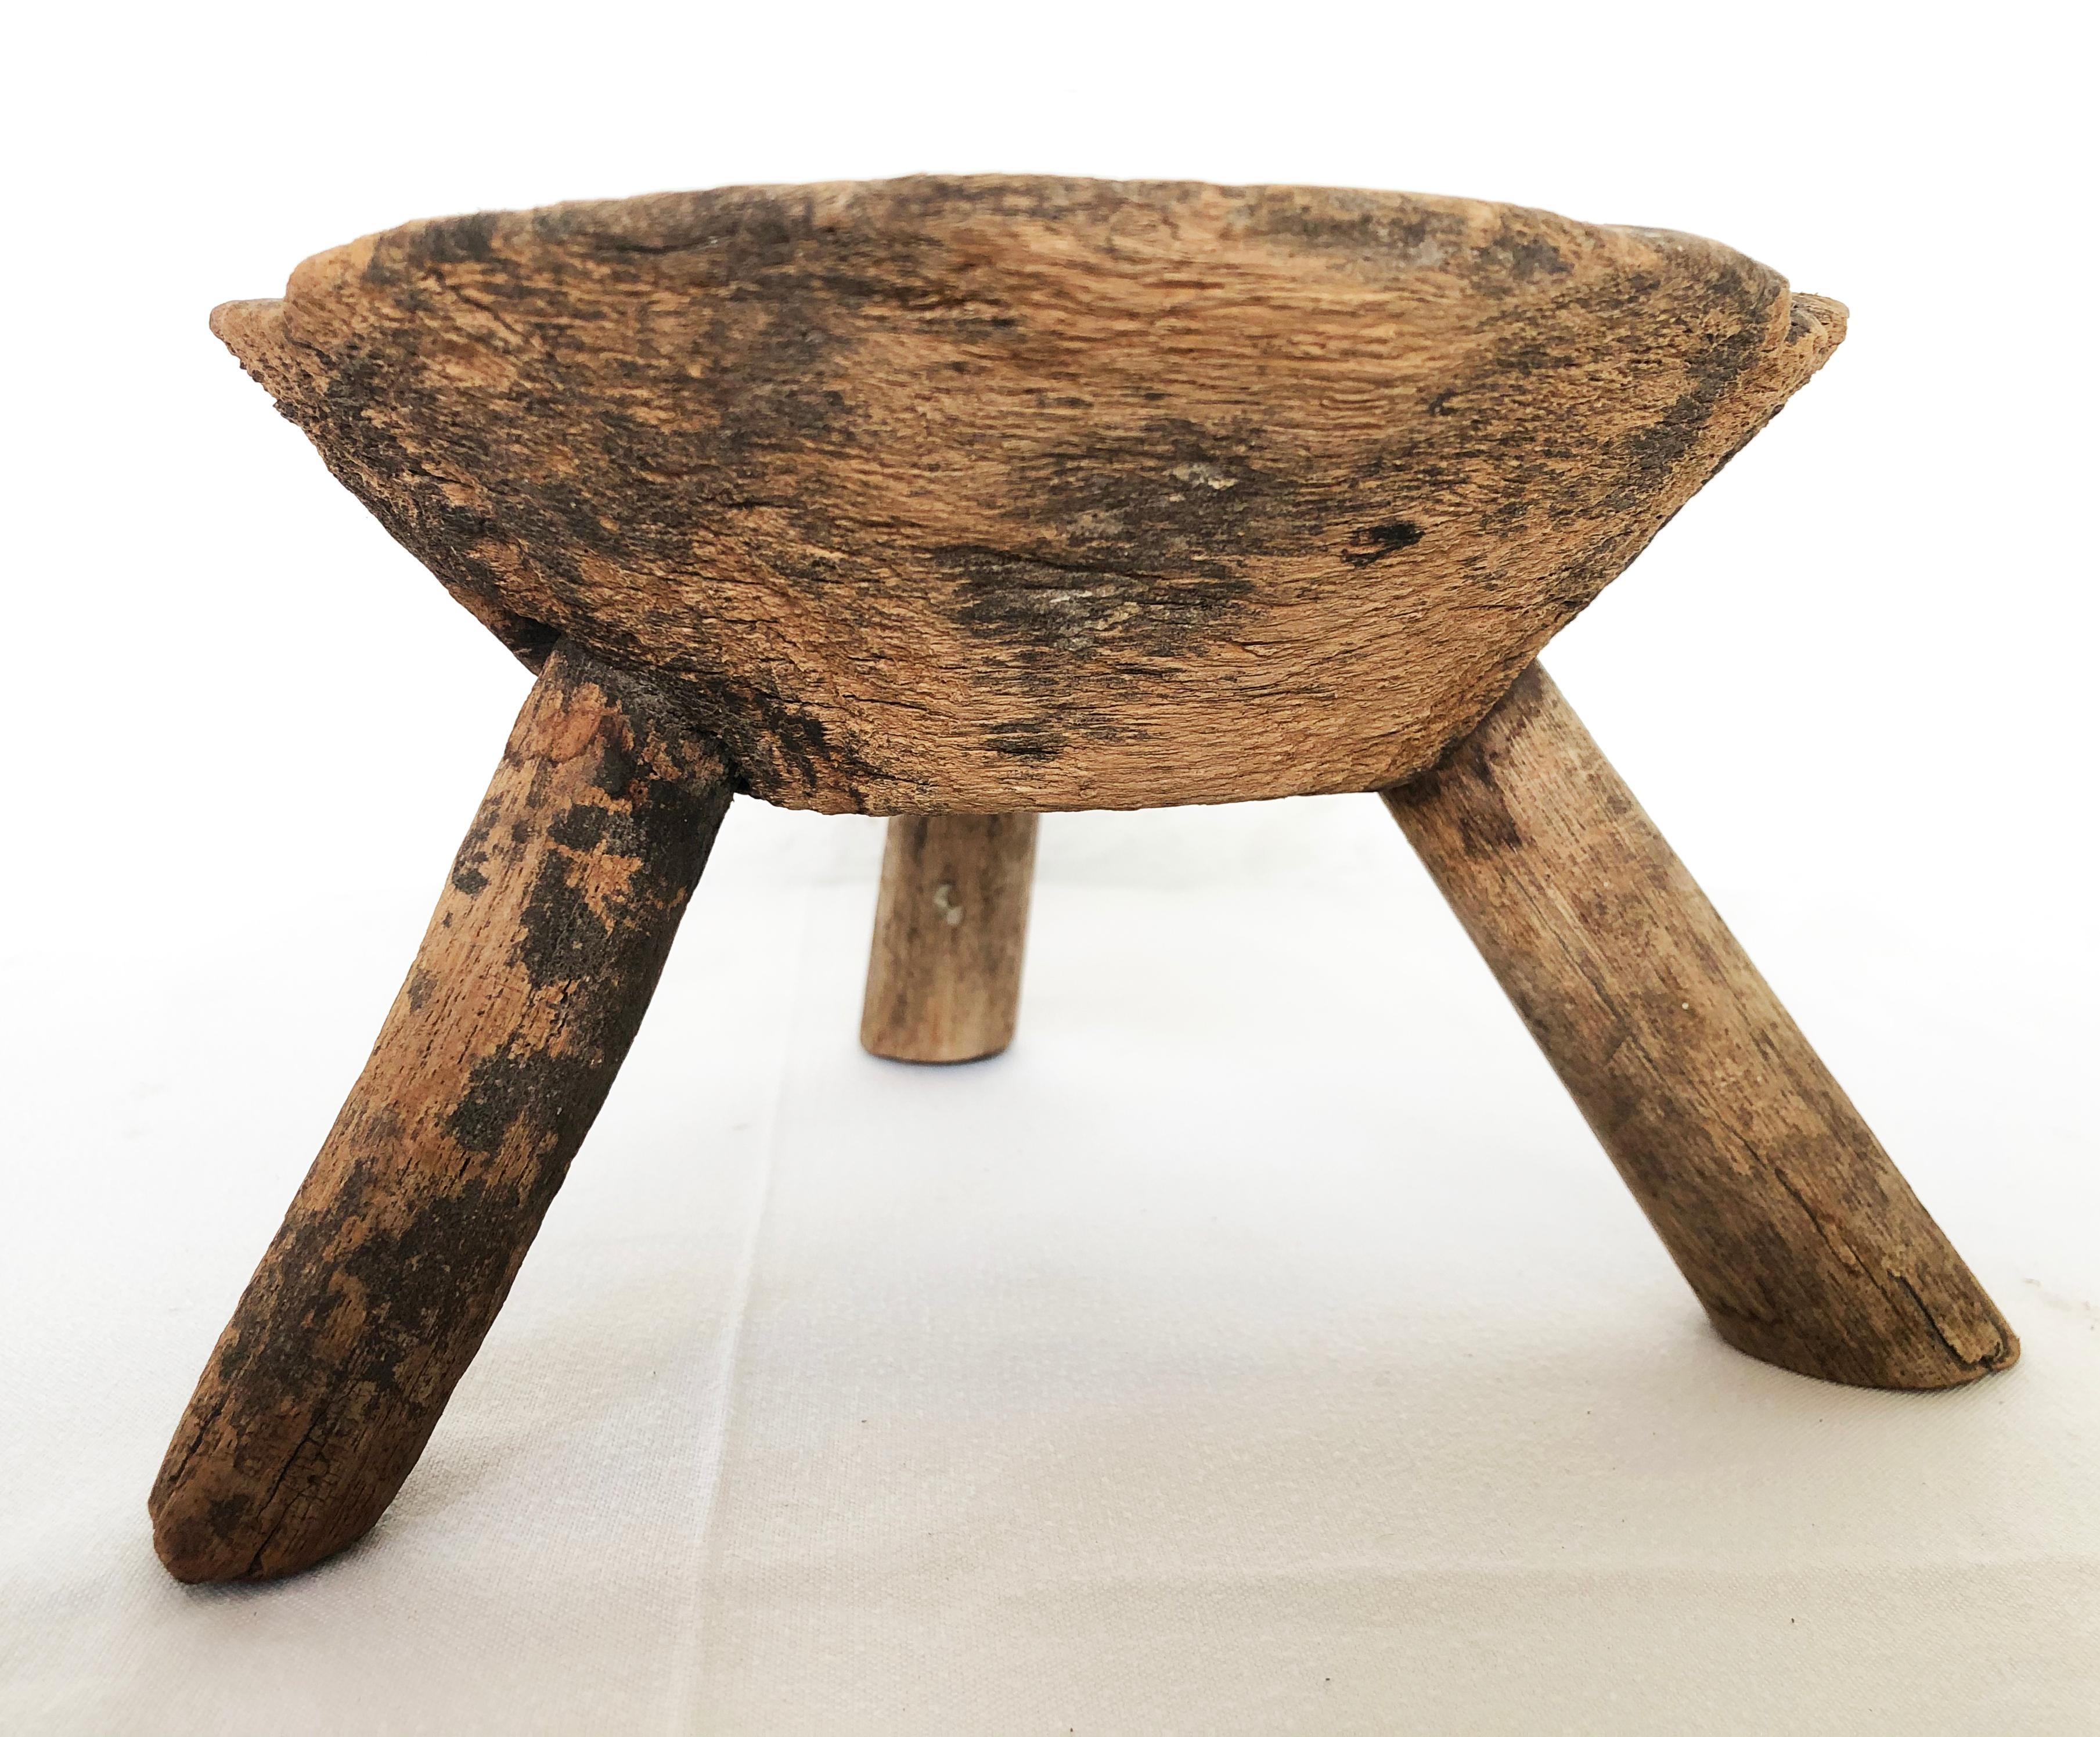 Antique natural mezquite minimilking stool wood stool with thick round top found in Western Mexico.
 